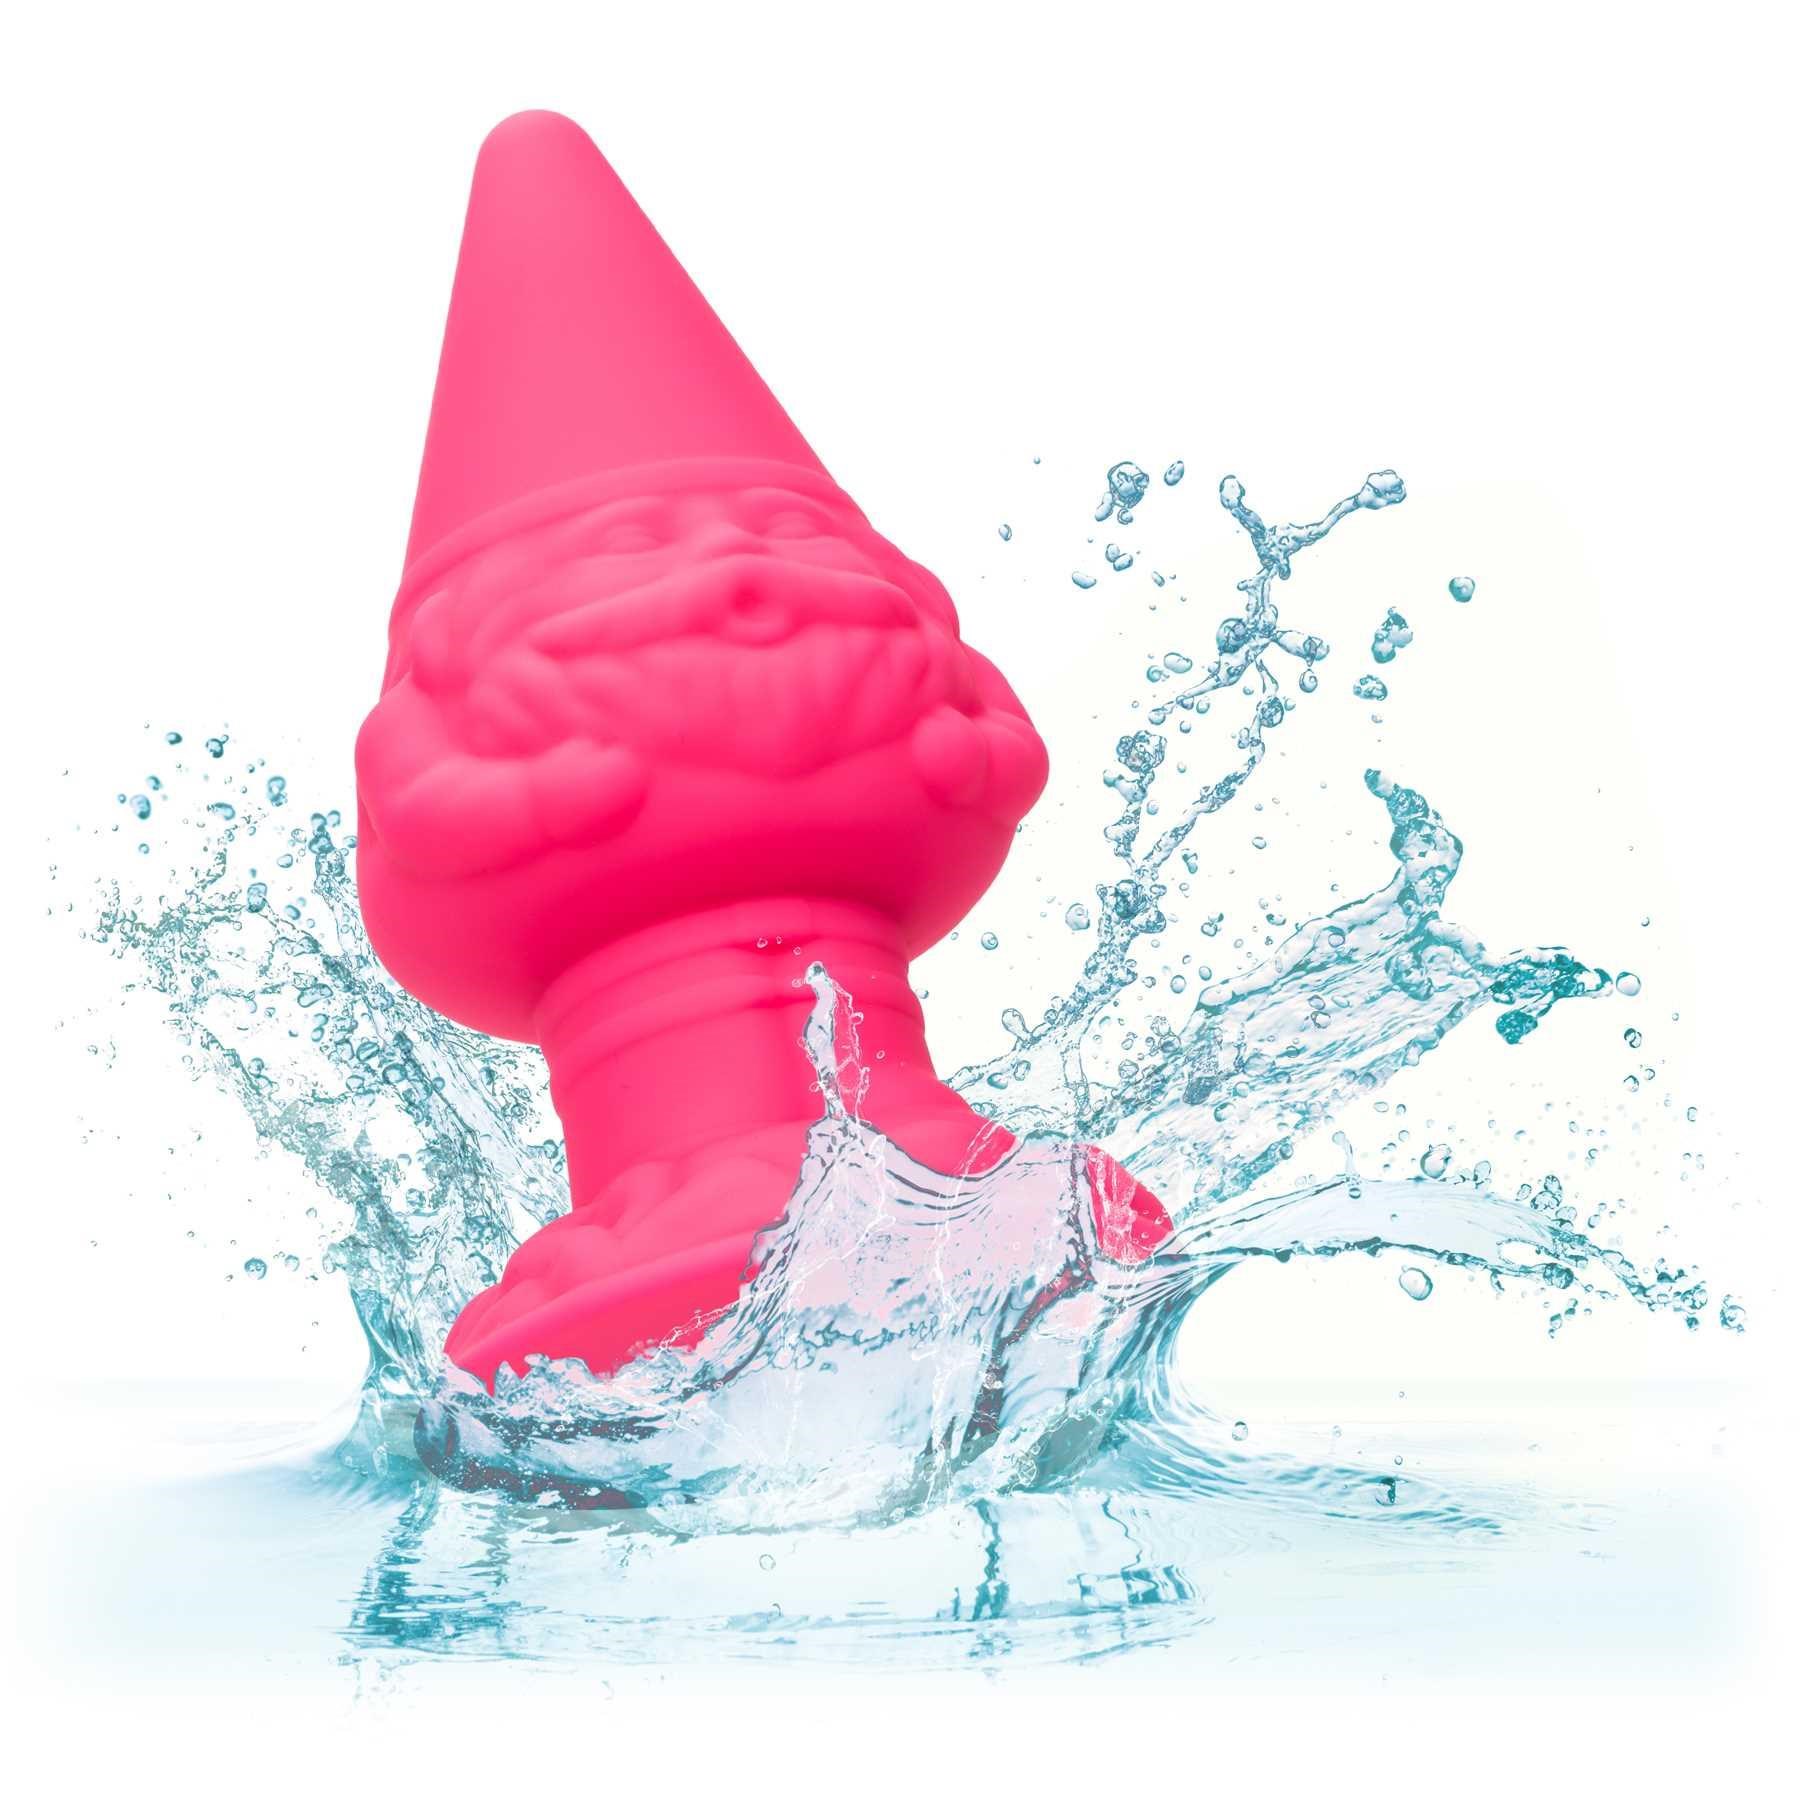 Naughty Bits Anal Gnome Butt Plug in water